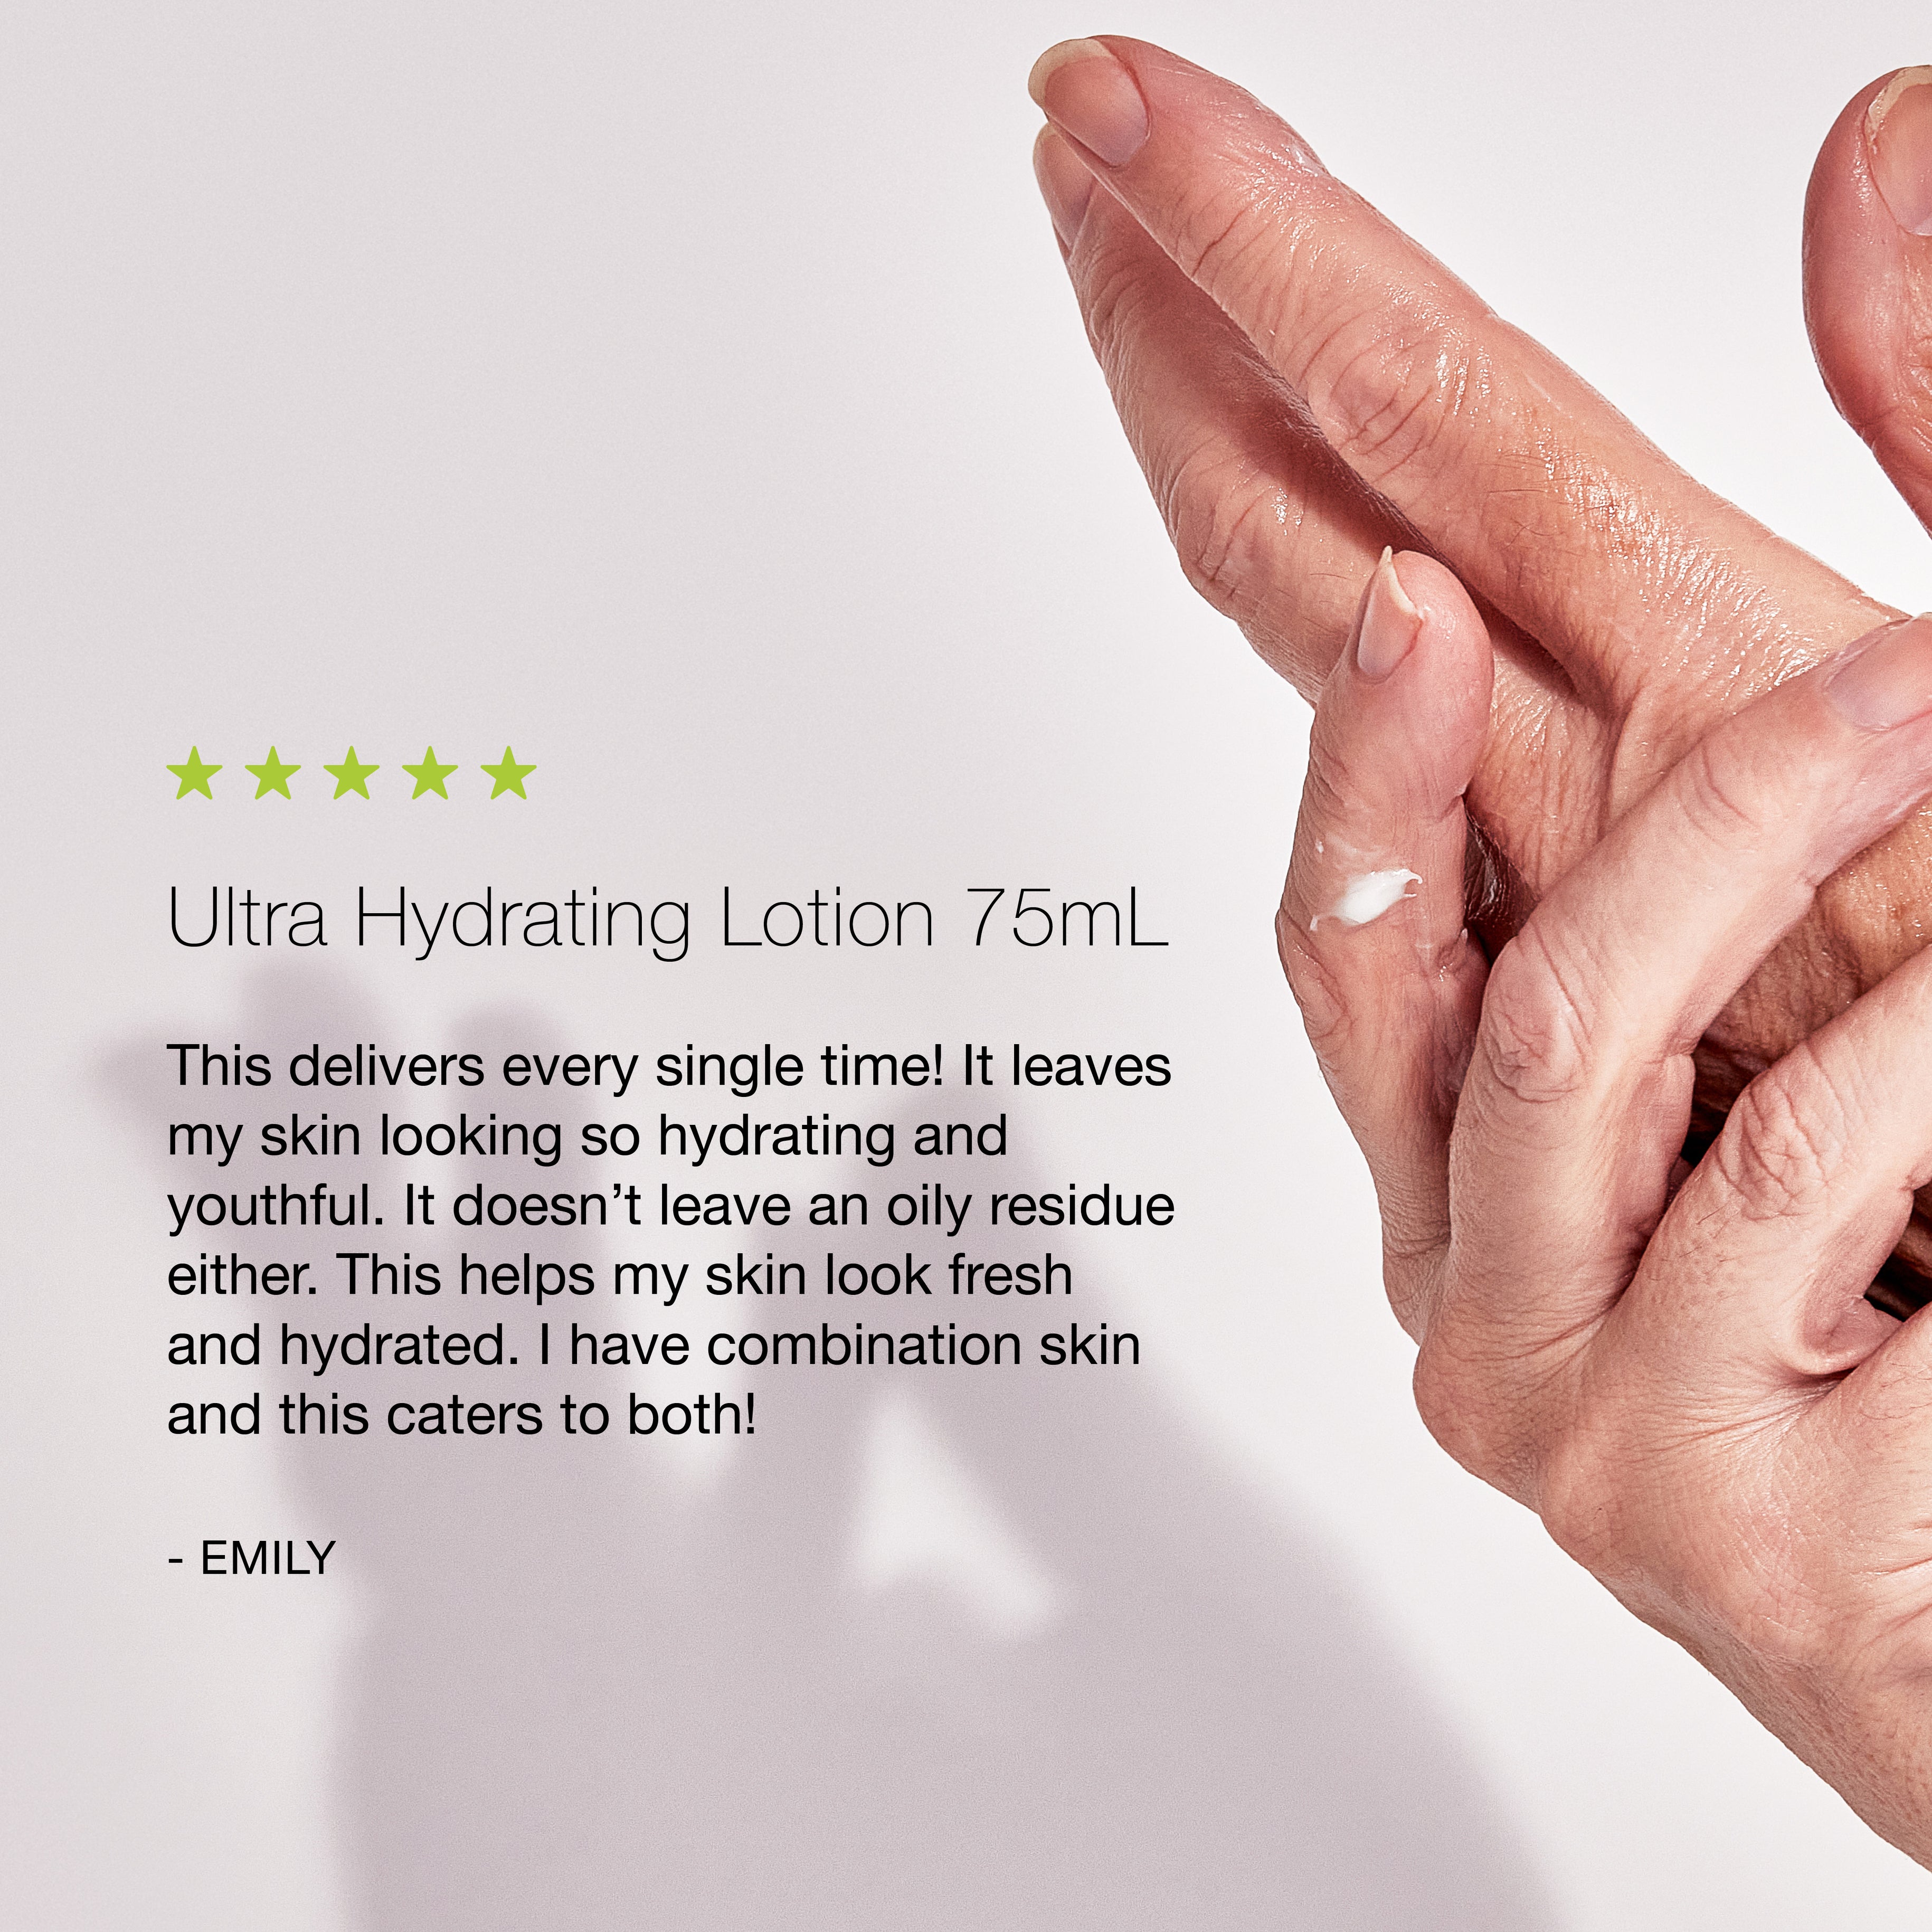 Ultra Hydrating Lotion